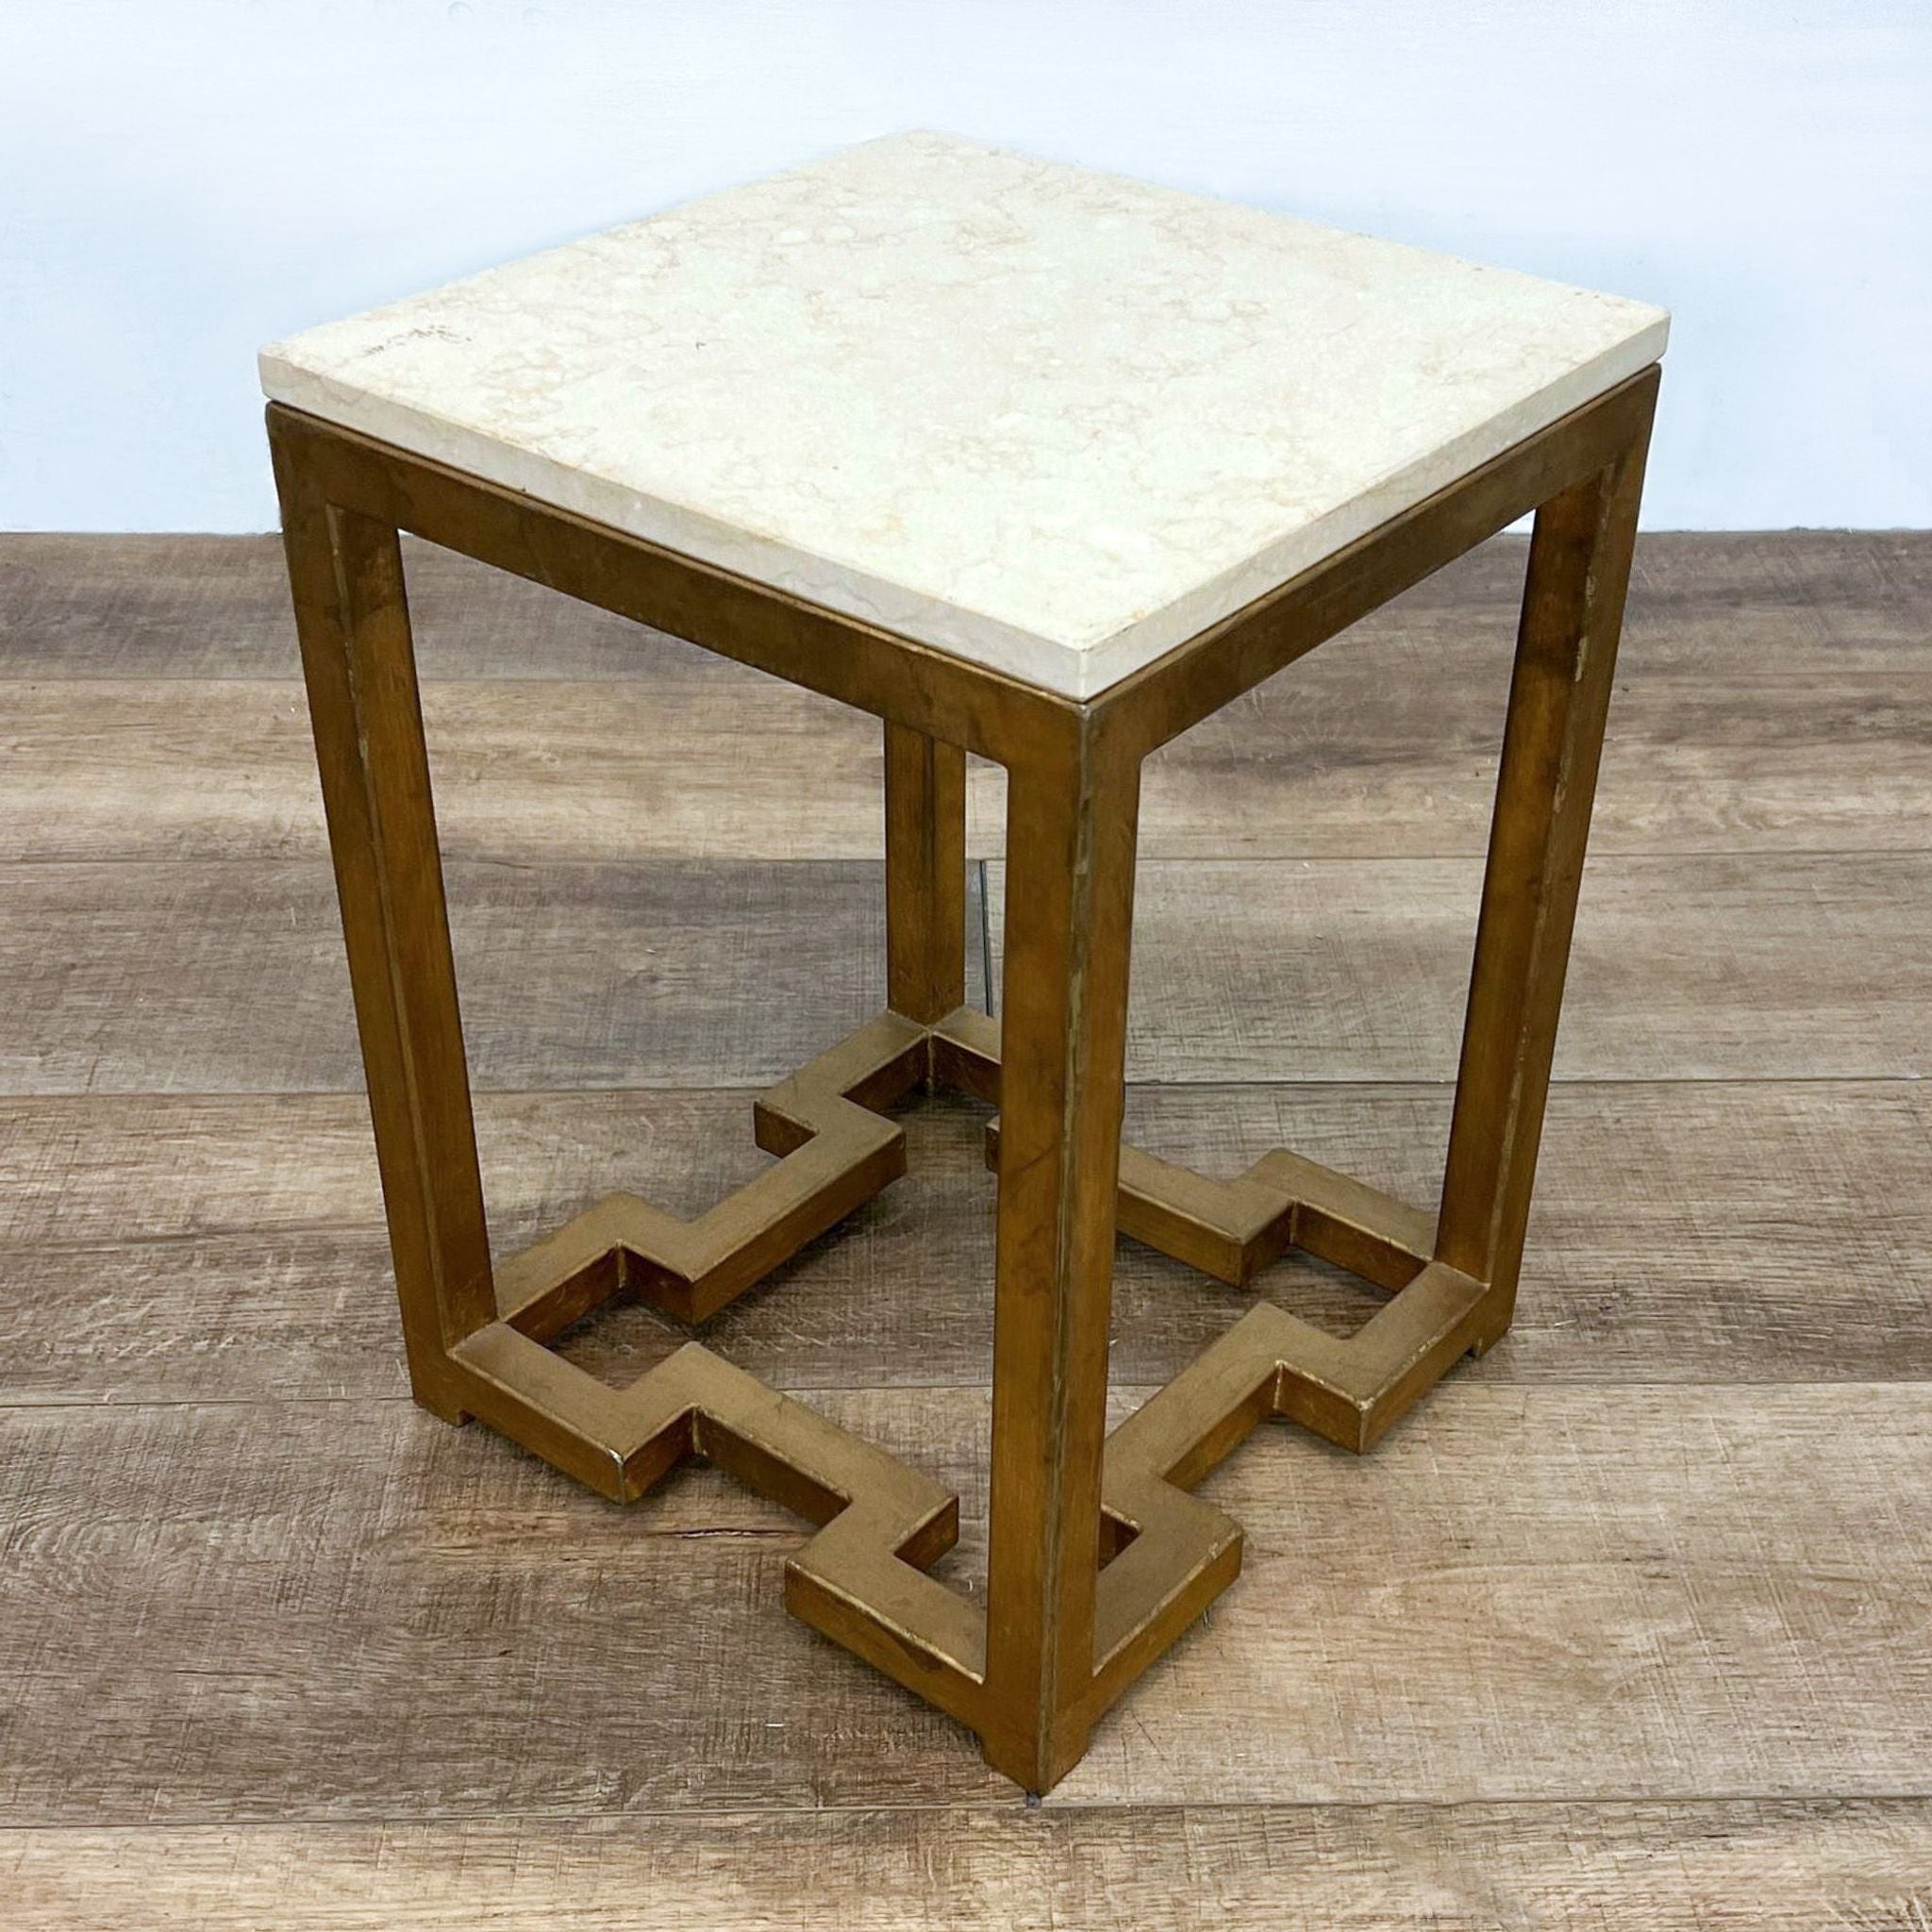 Square top console table by Reperch with antiqued brass finish base, featuring geometric design elements.